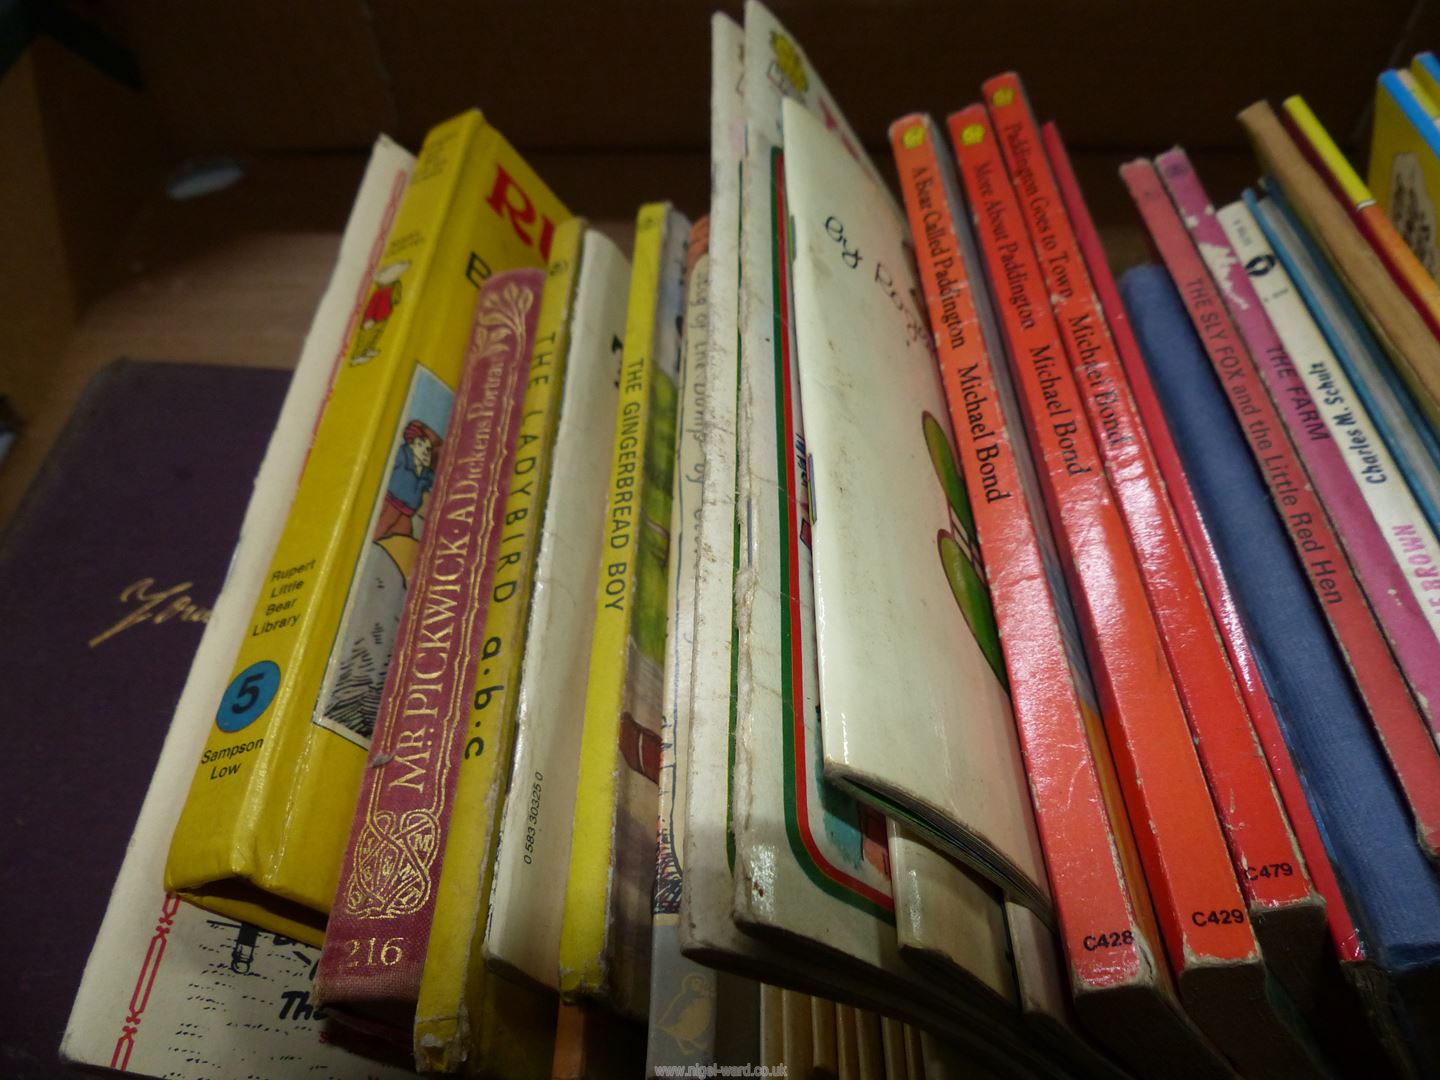 A quantity of children's books to include; Toyland Tales, Dandy, Ladybird Books, Rupert, etc. - Image 3 of 3